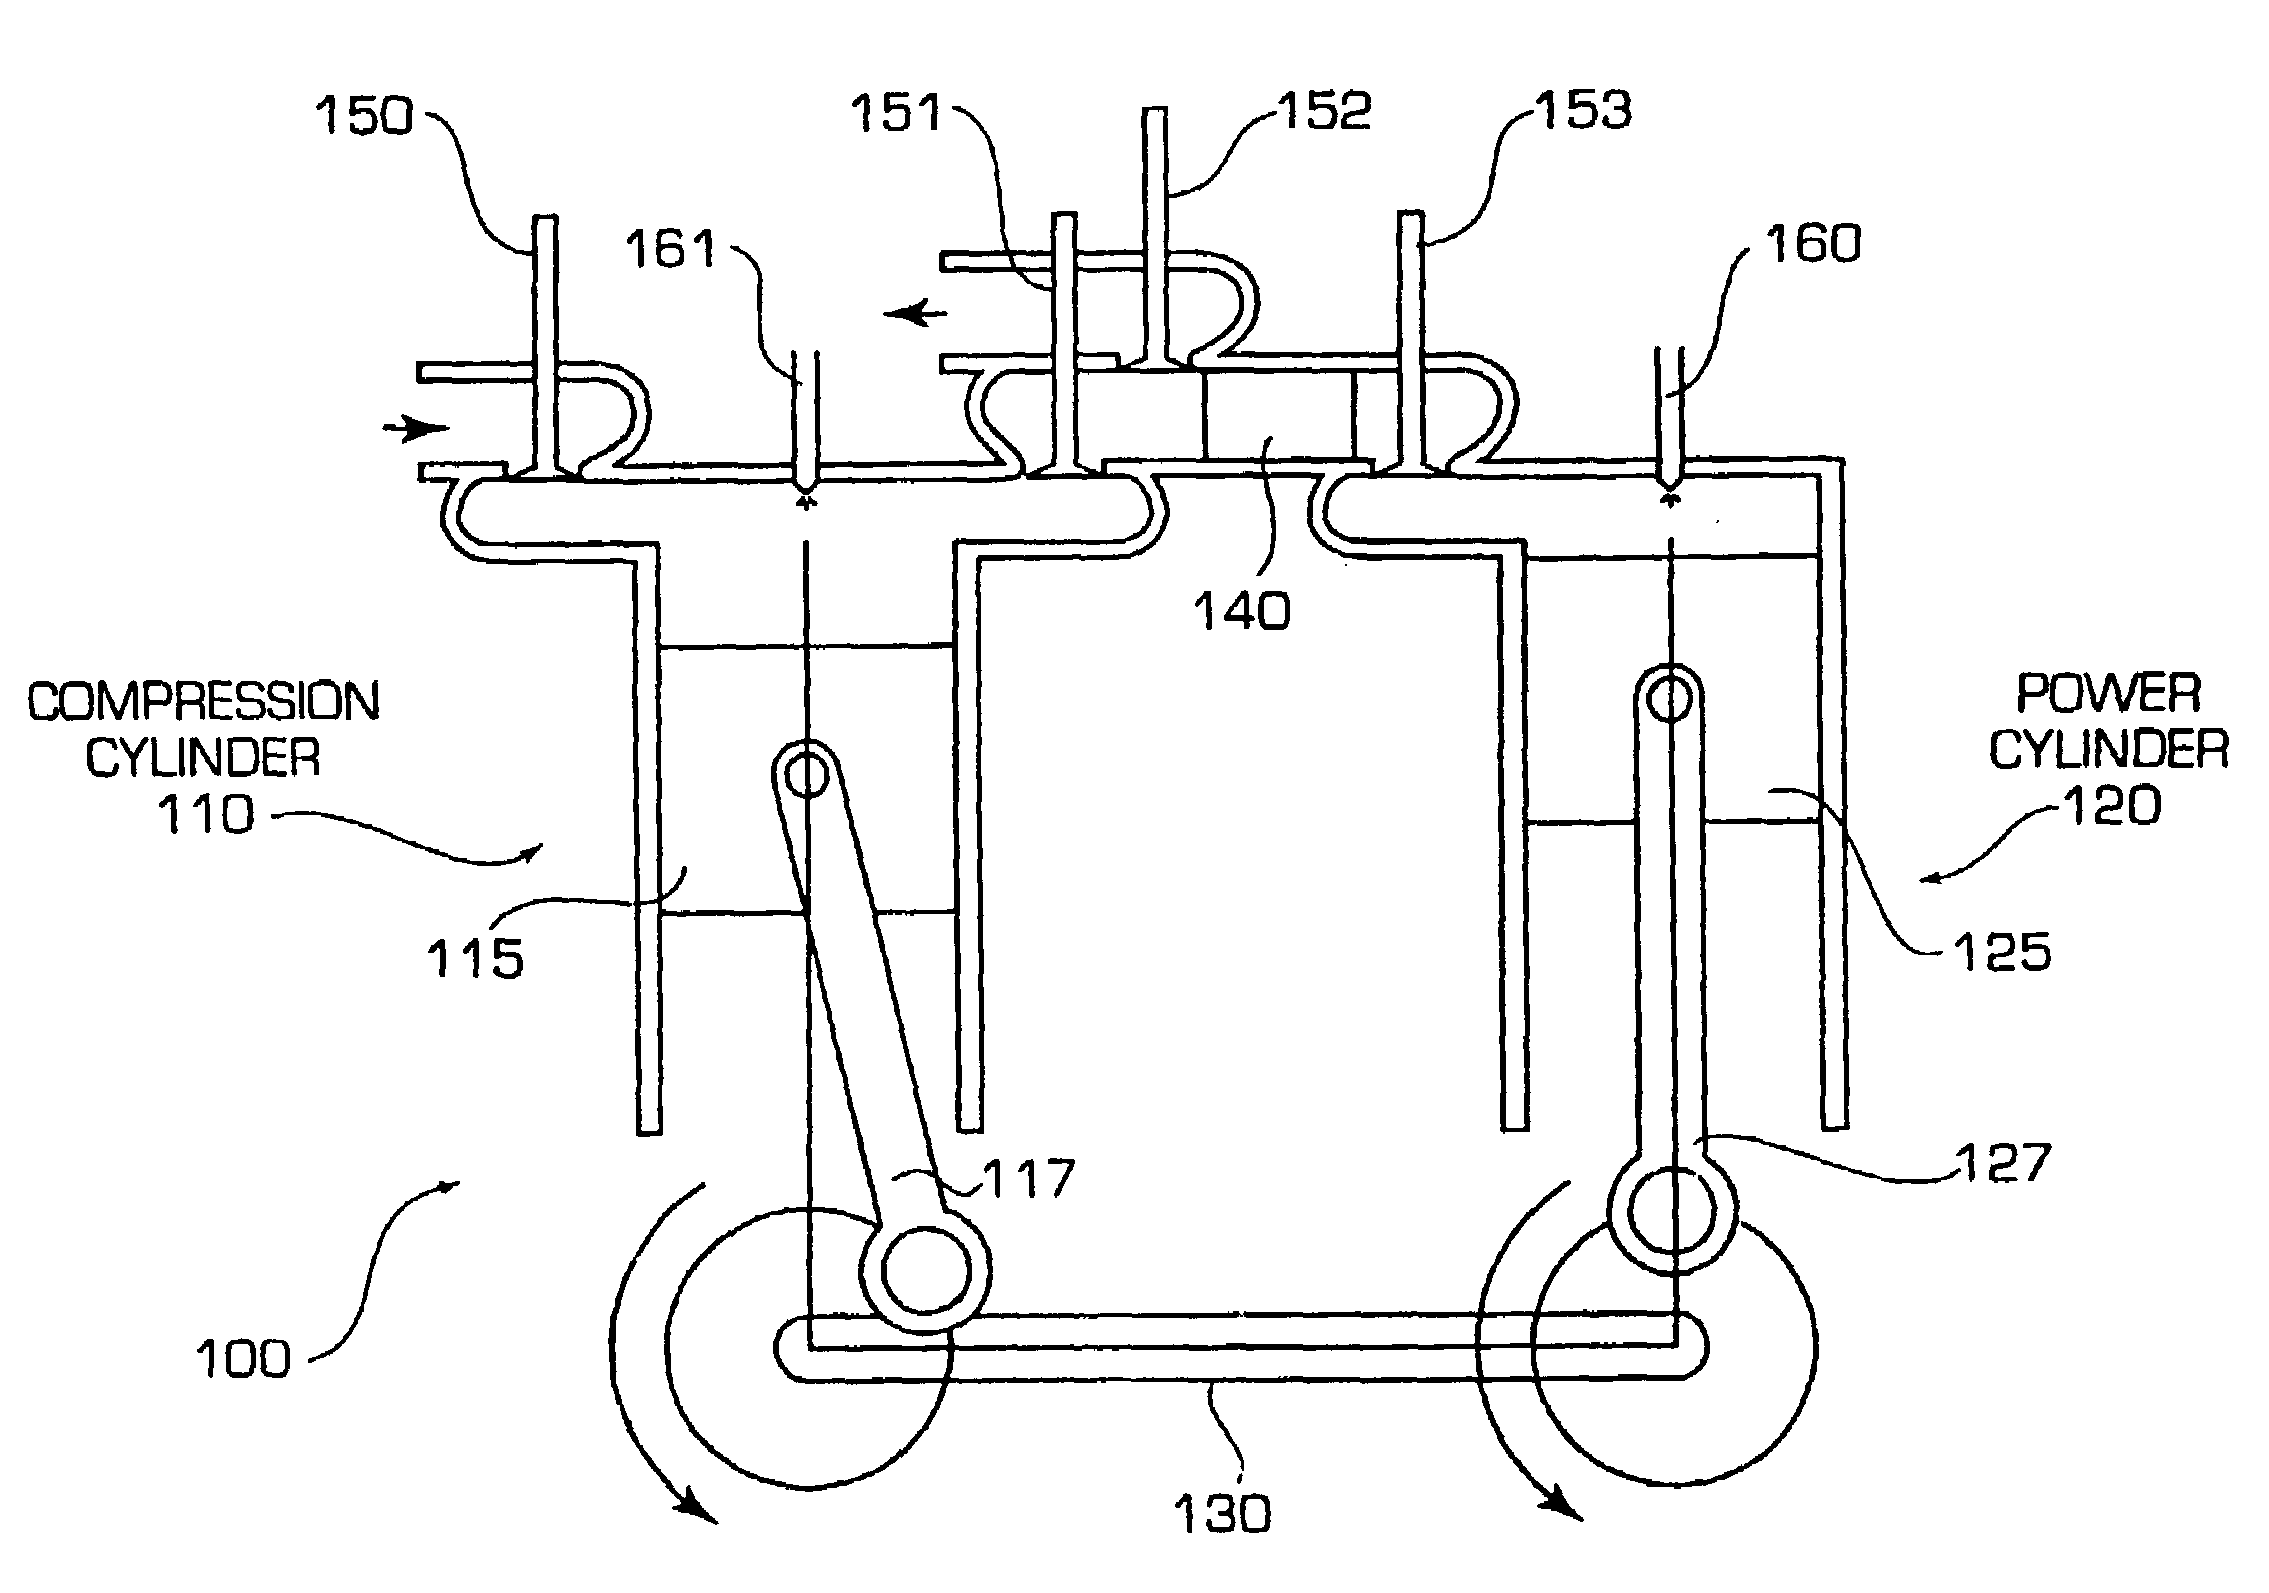 Internal combustion engine with regenerator, hot air ignition, and supercharger-based engine control